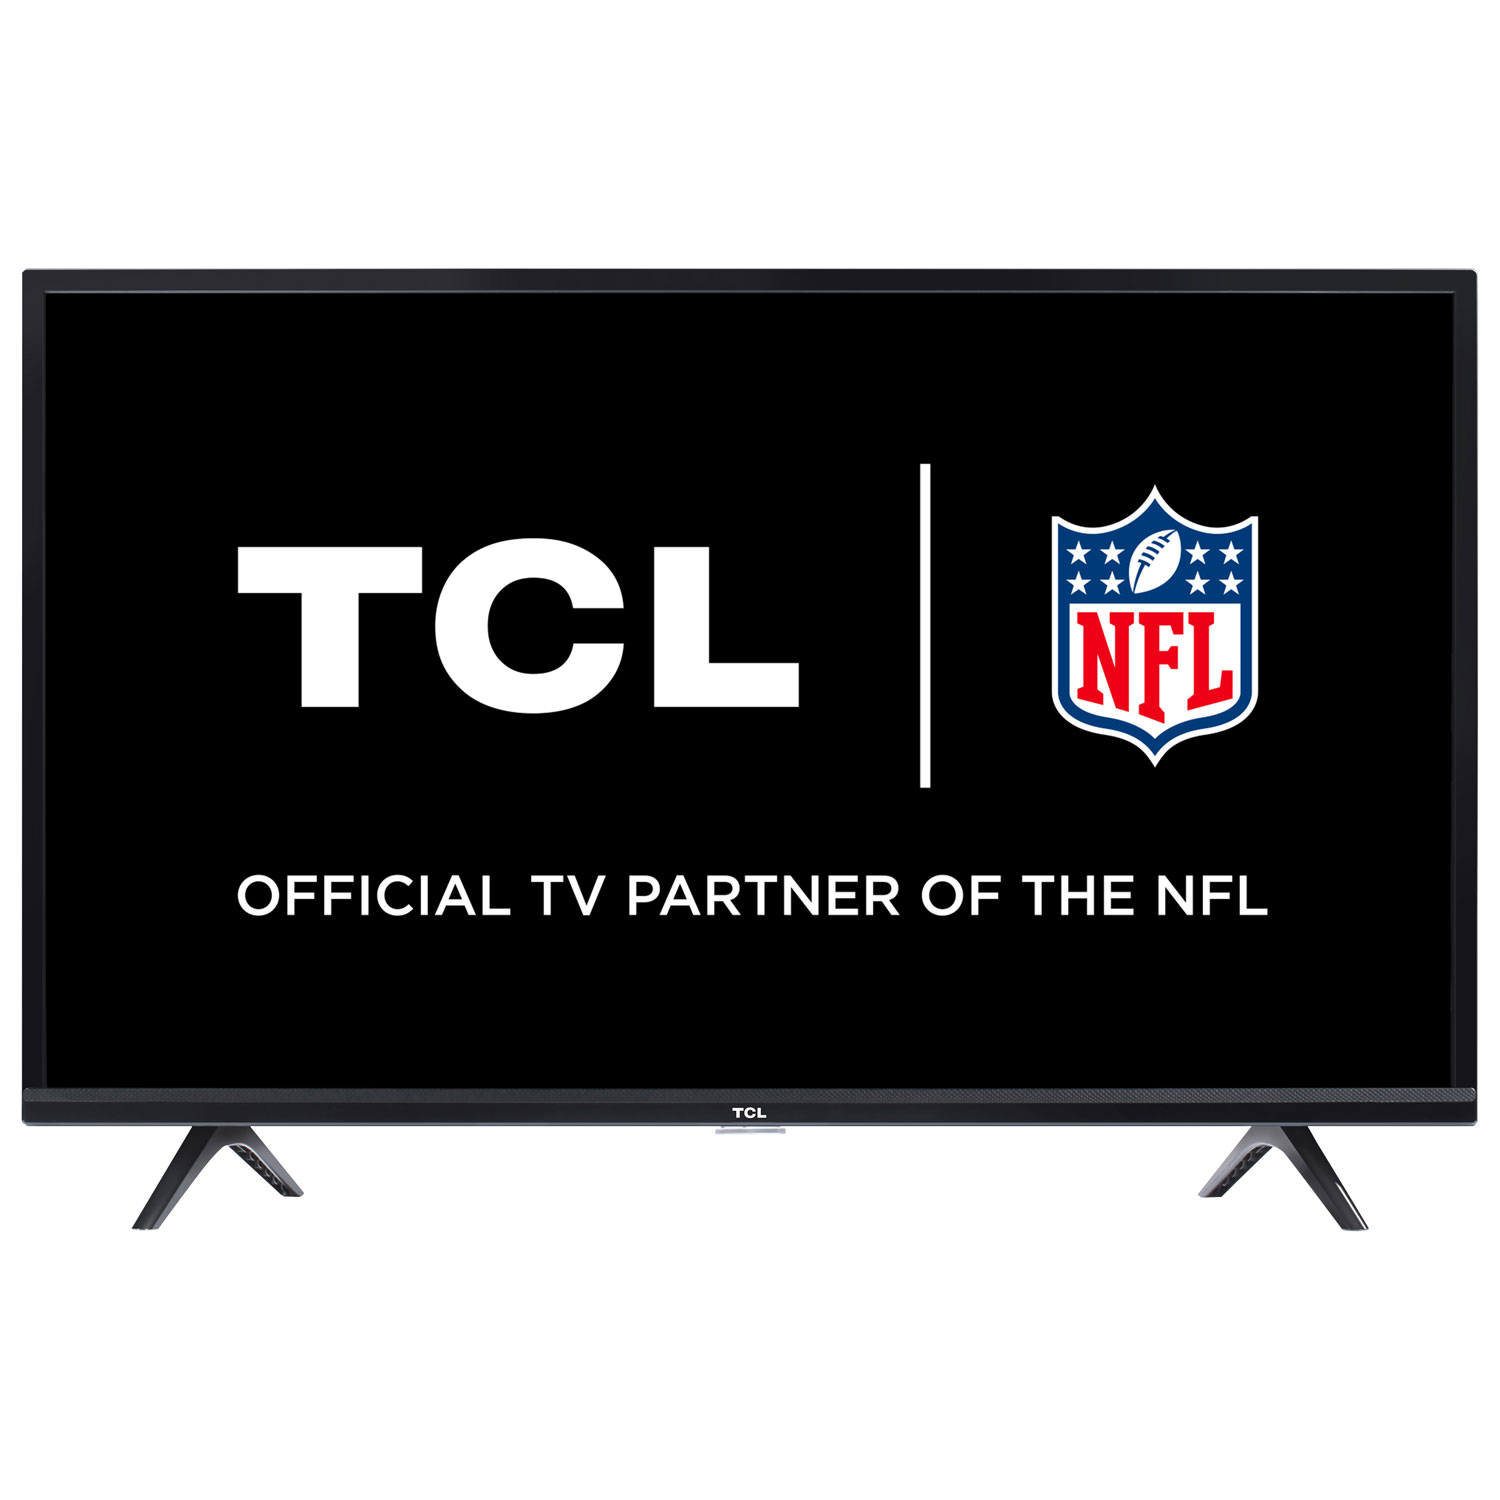 TCL 3-Series 40" 1080p HD LED Android Smart TV (40S334-CA) - 2021